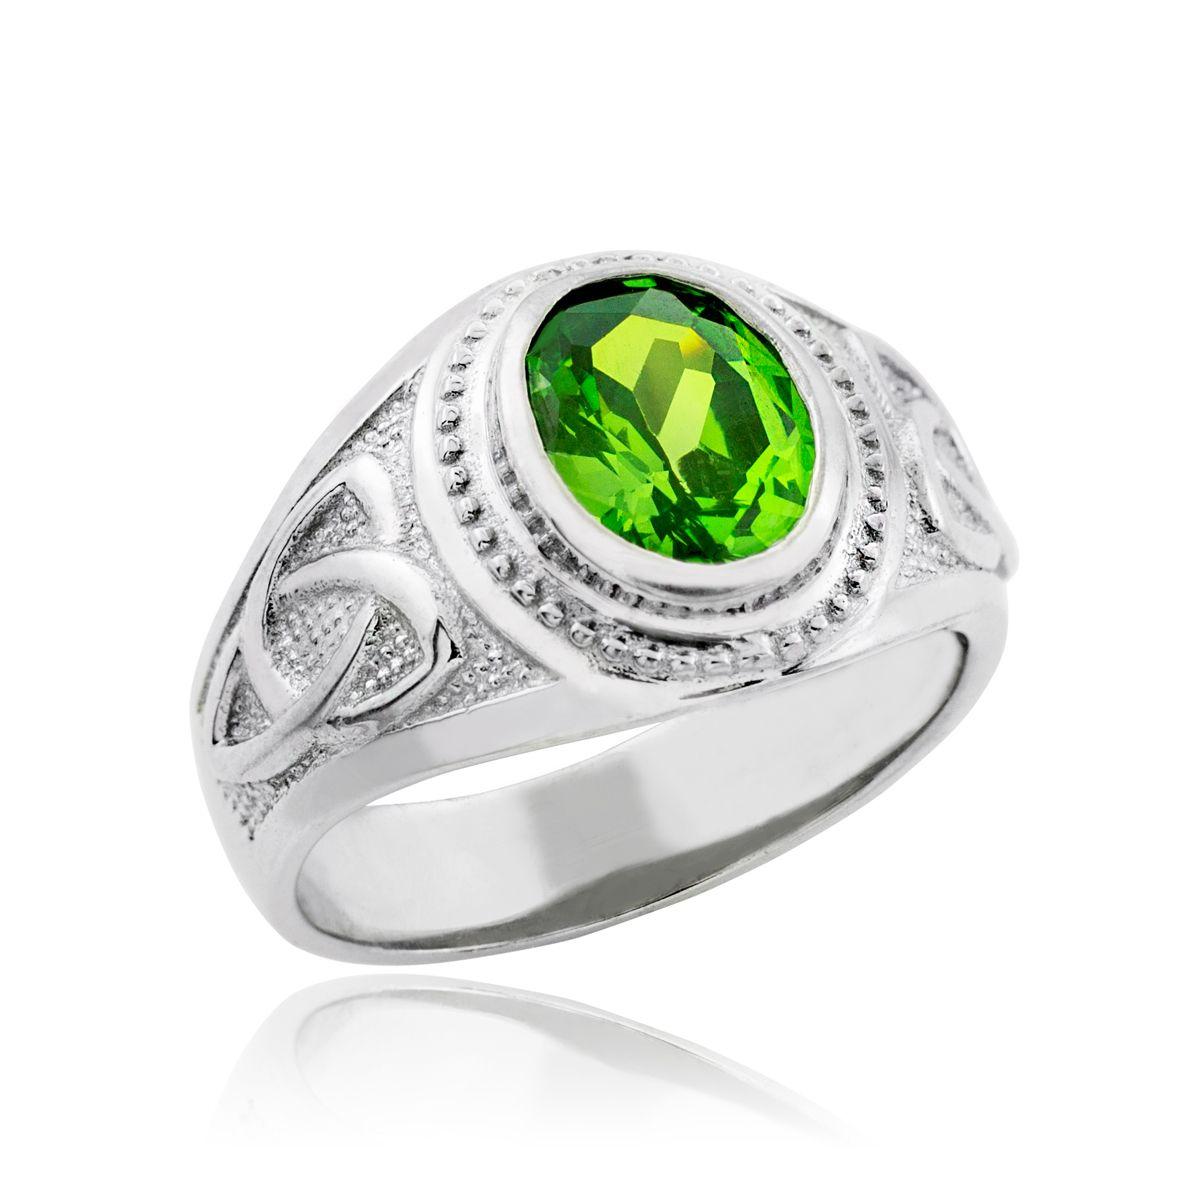 White and Green Oval Logo - White Gold Celtic Emerald Green Oval CZ Men's Ring